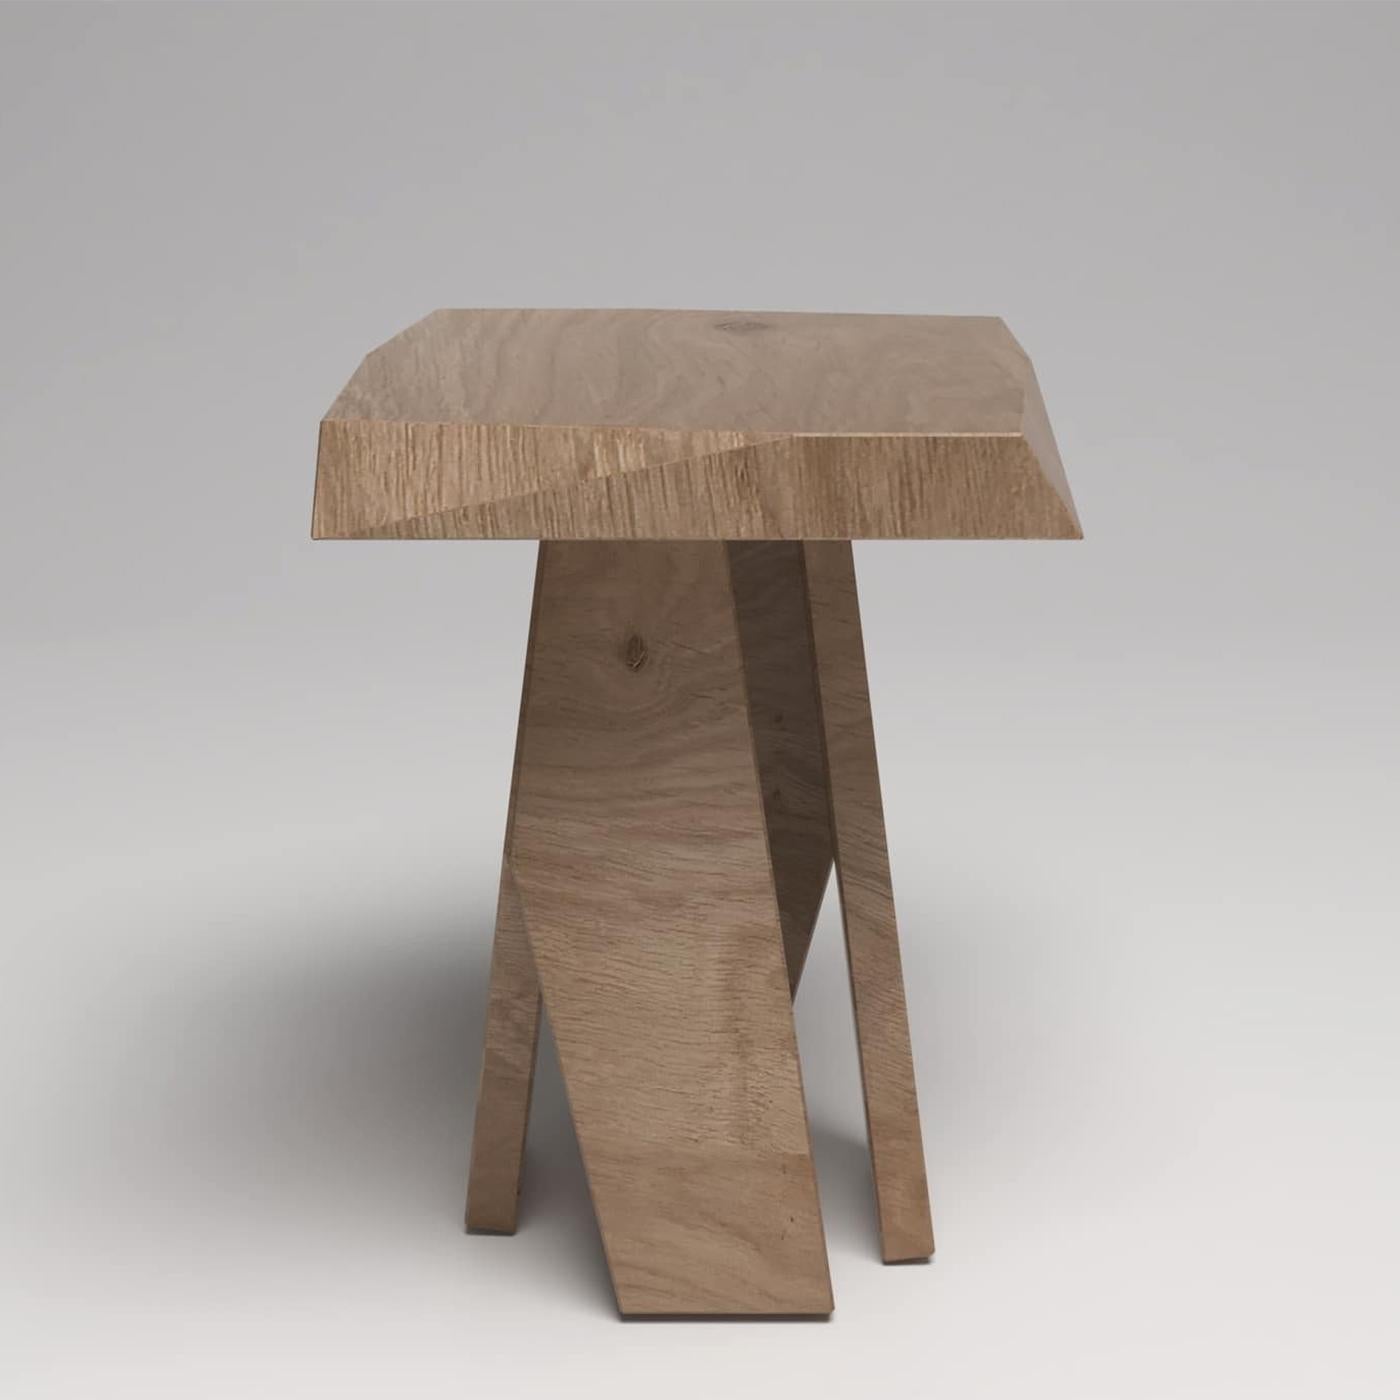 Stool Softo Oak all in solid hand-crafted
carved oak in soft finish.